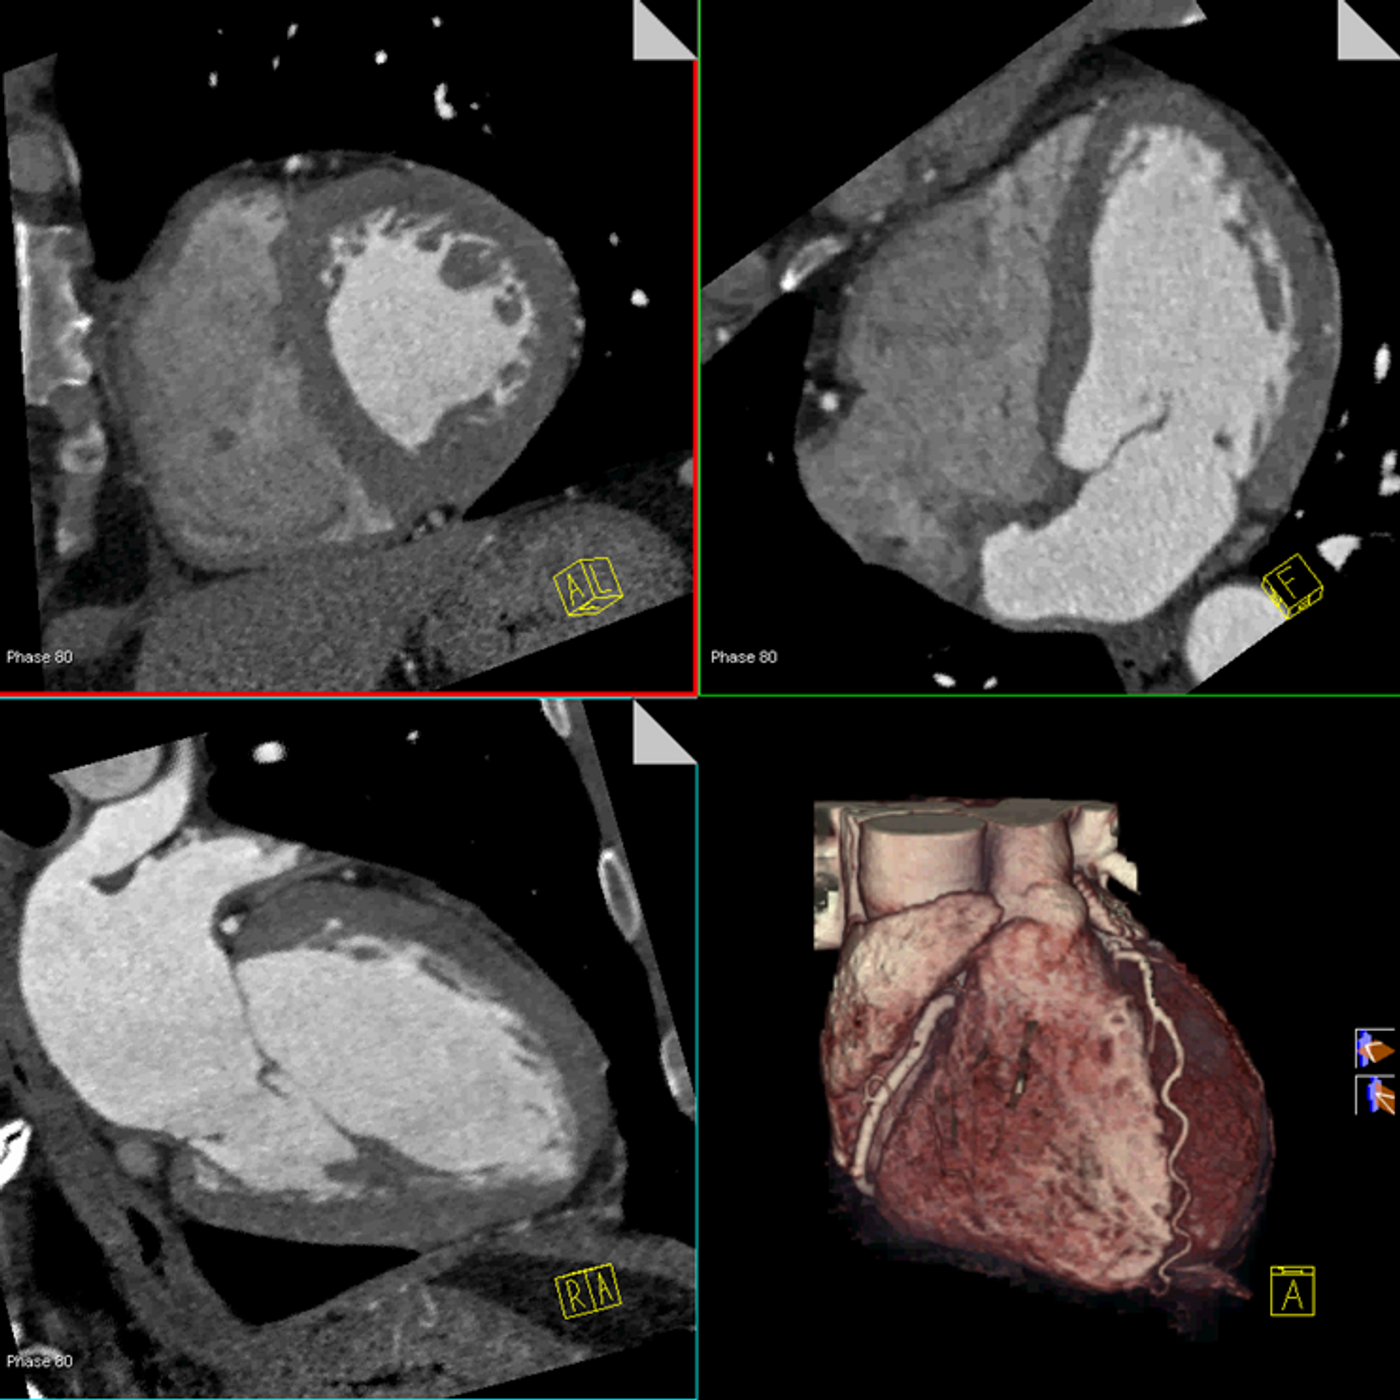 Coronary CT angiography (CCTA) is a noninvasive imaging modality which can be used to evaluate the anatomy of the coronary arteries. Credit: Clinical Correlations